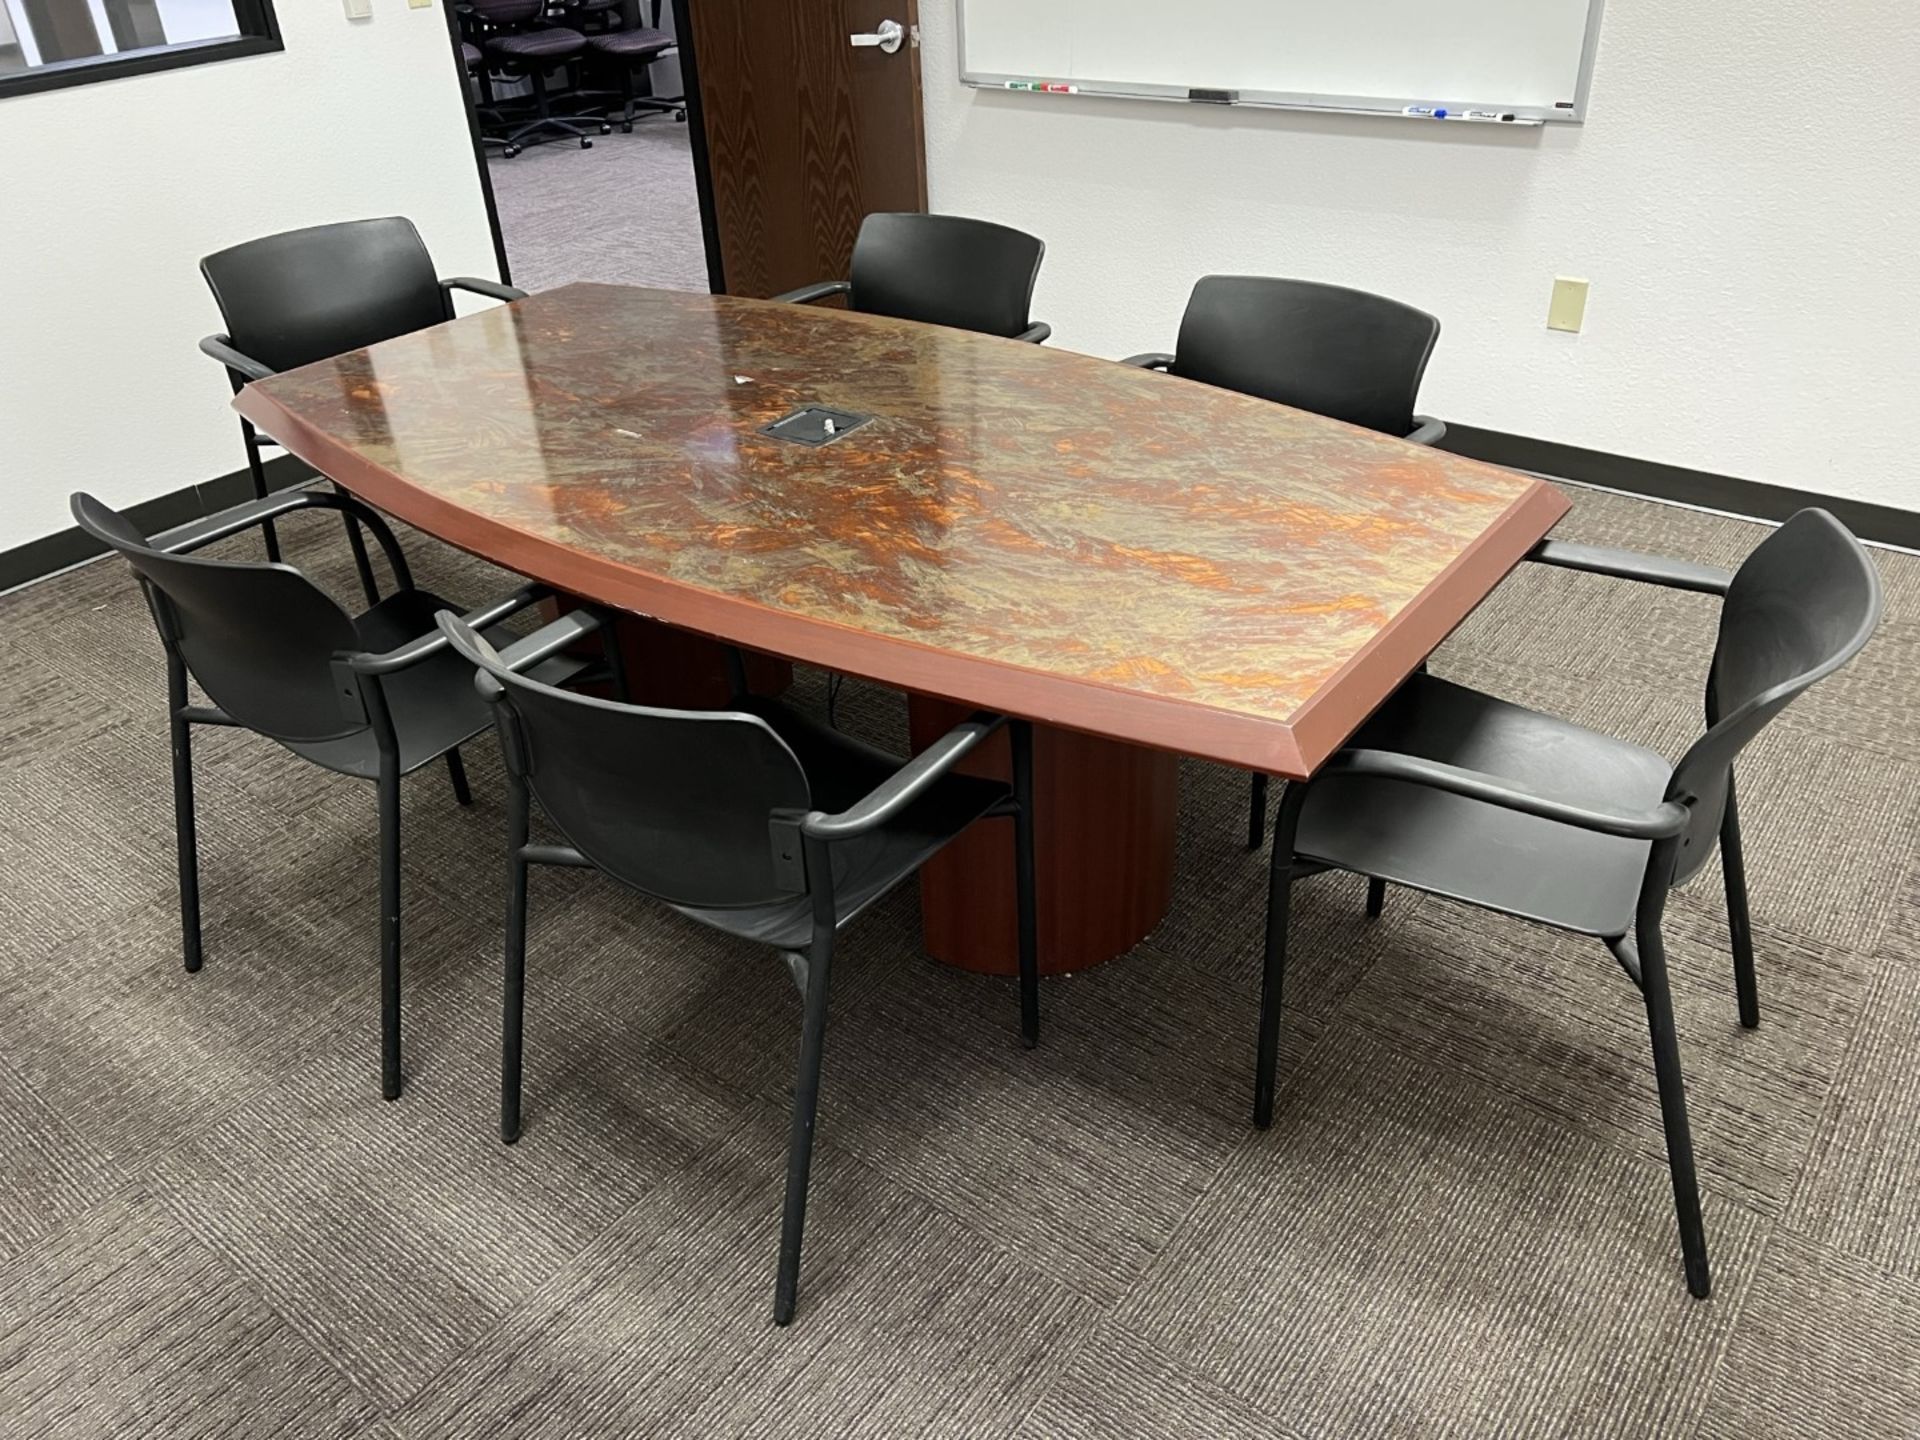 Conference Tables - Image 4 of 6